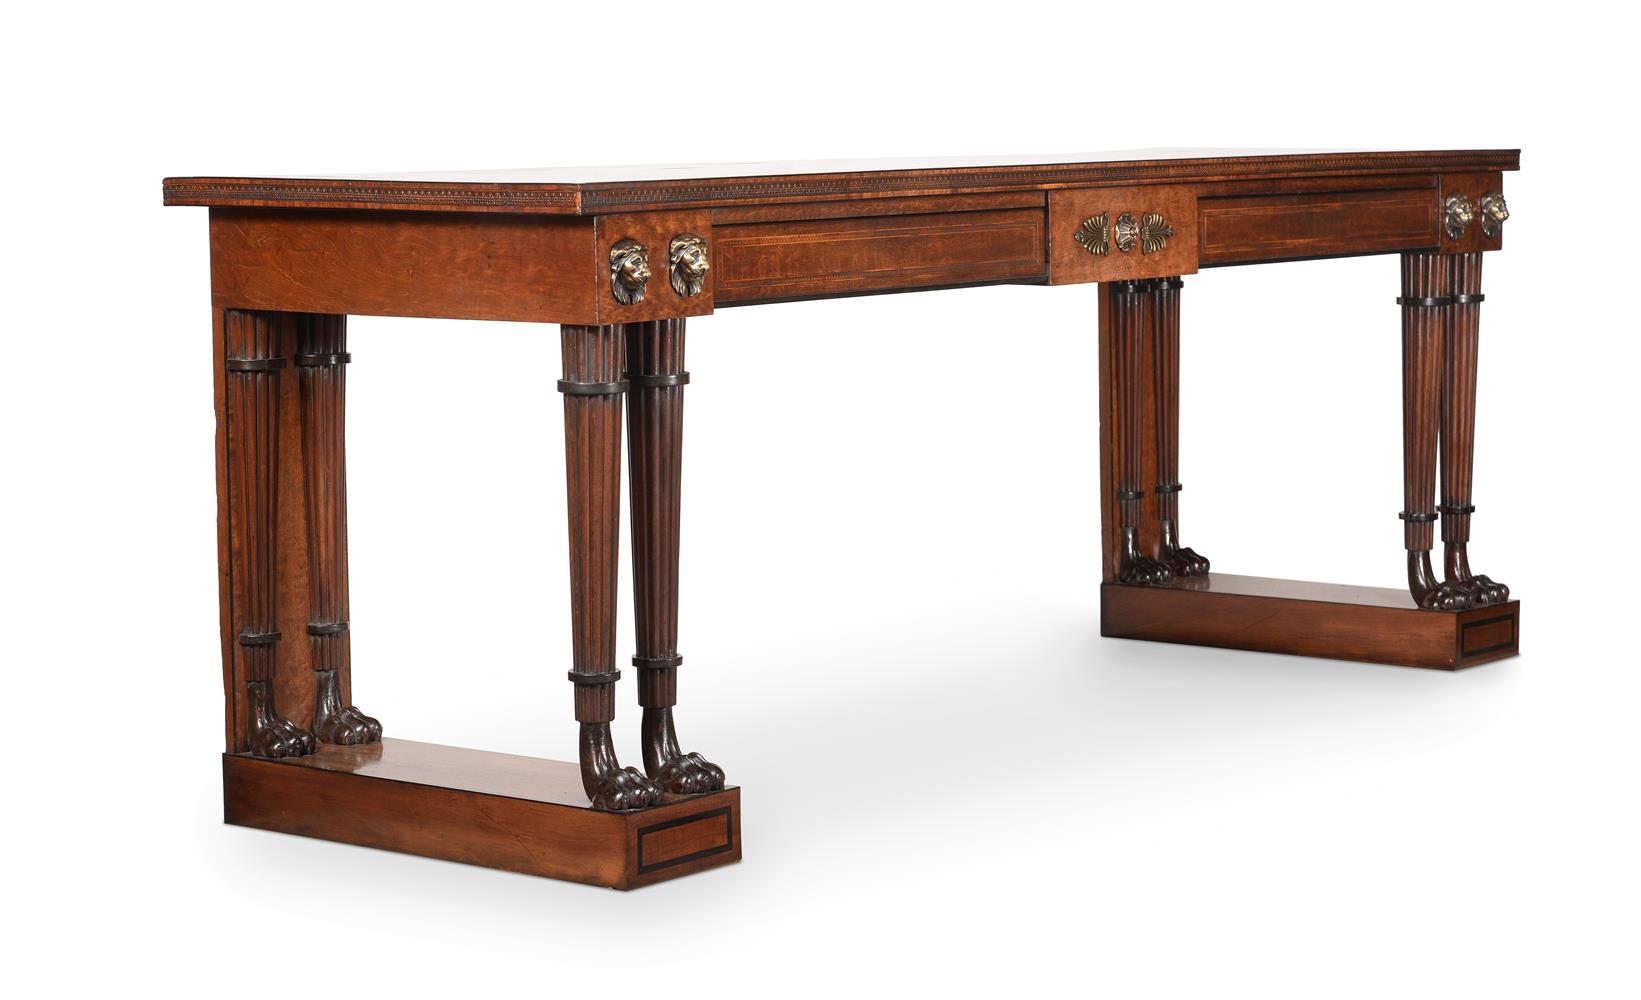 A REGENCY SERVING OR SIDE TABLE, ATTRIBUTED TO GEORGE OAKLEY, CIRCA 1810